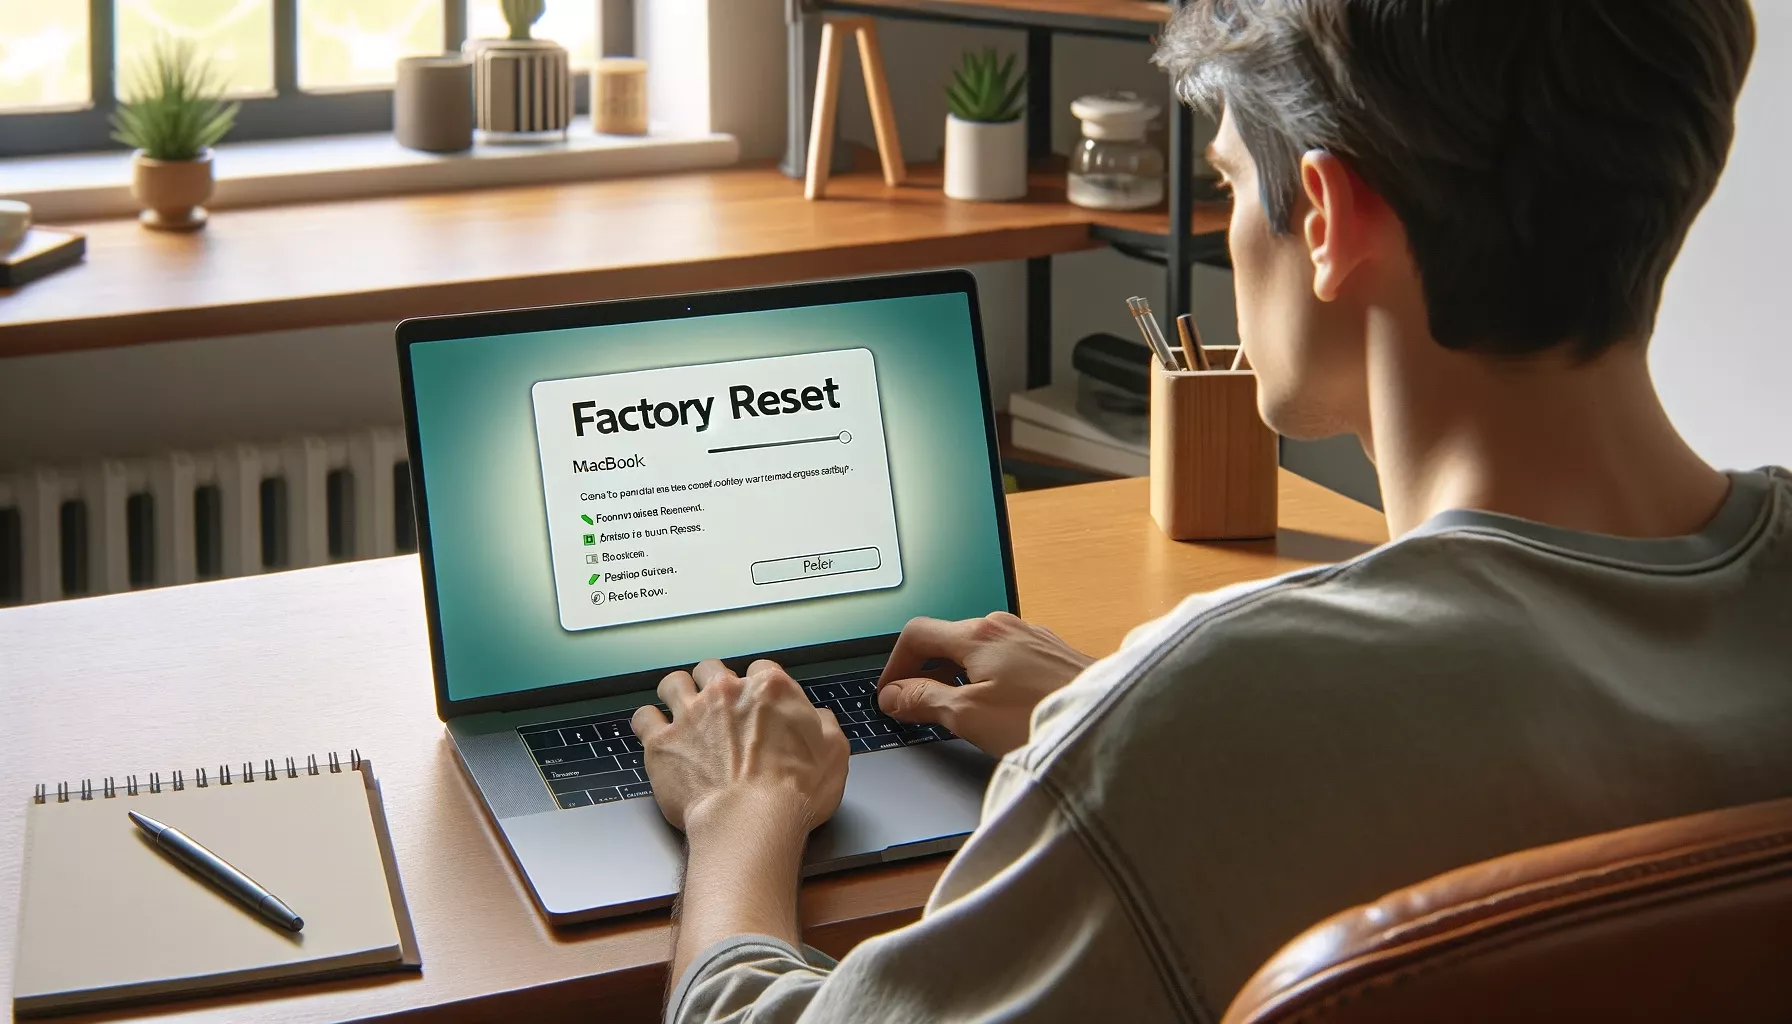 Person sitting at a desk, performing a factory reset on a MacBook with the screen showing 'Factory Reset' option.